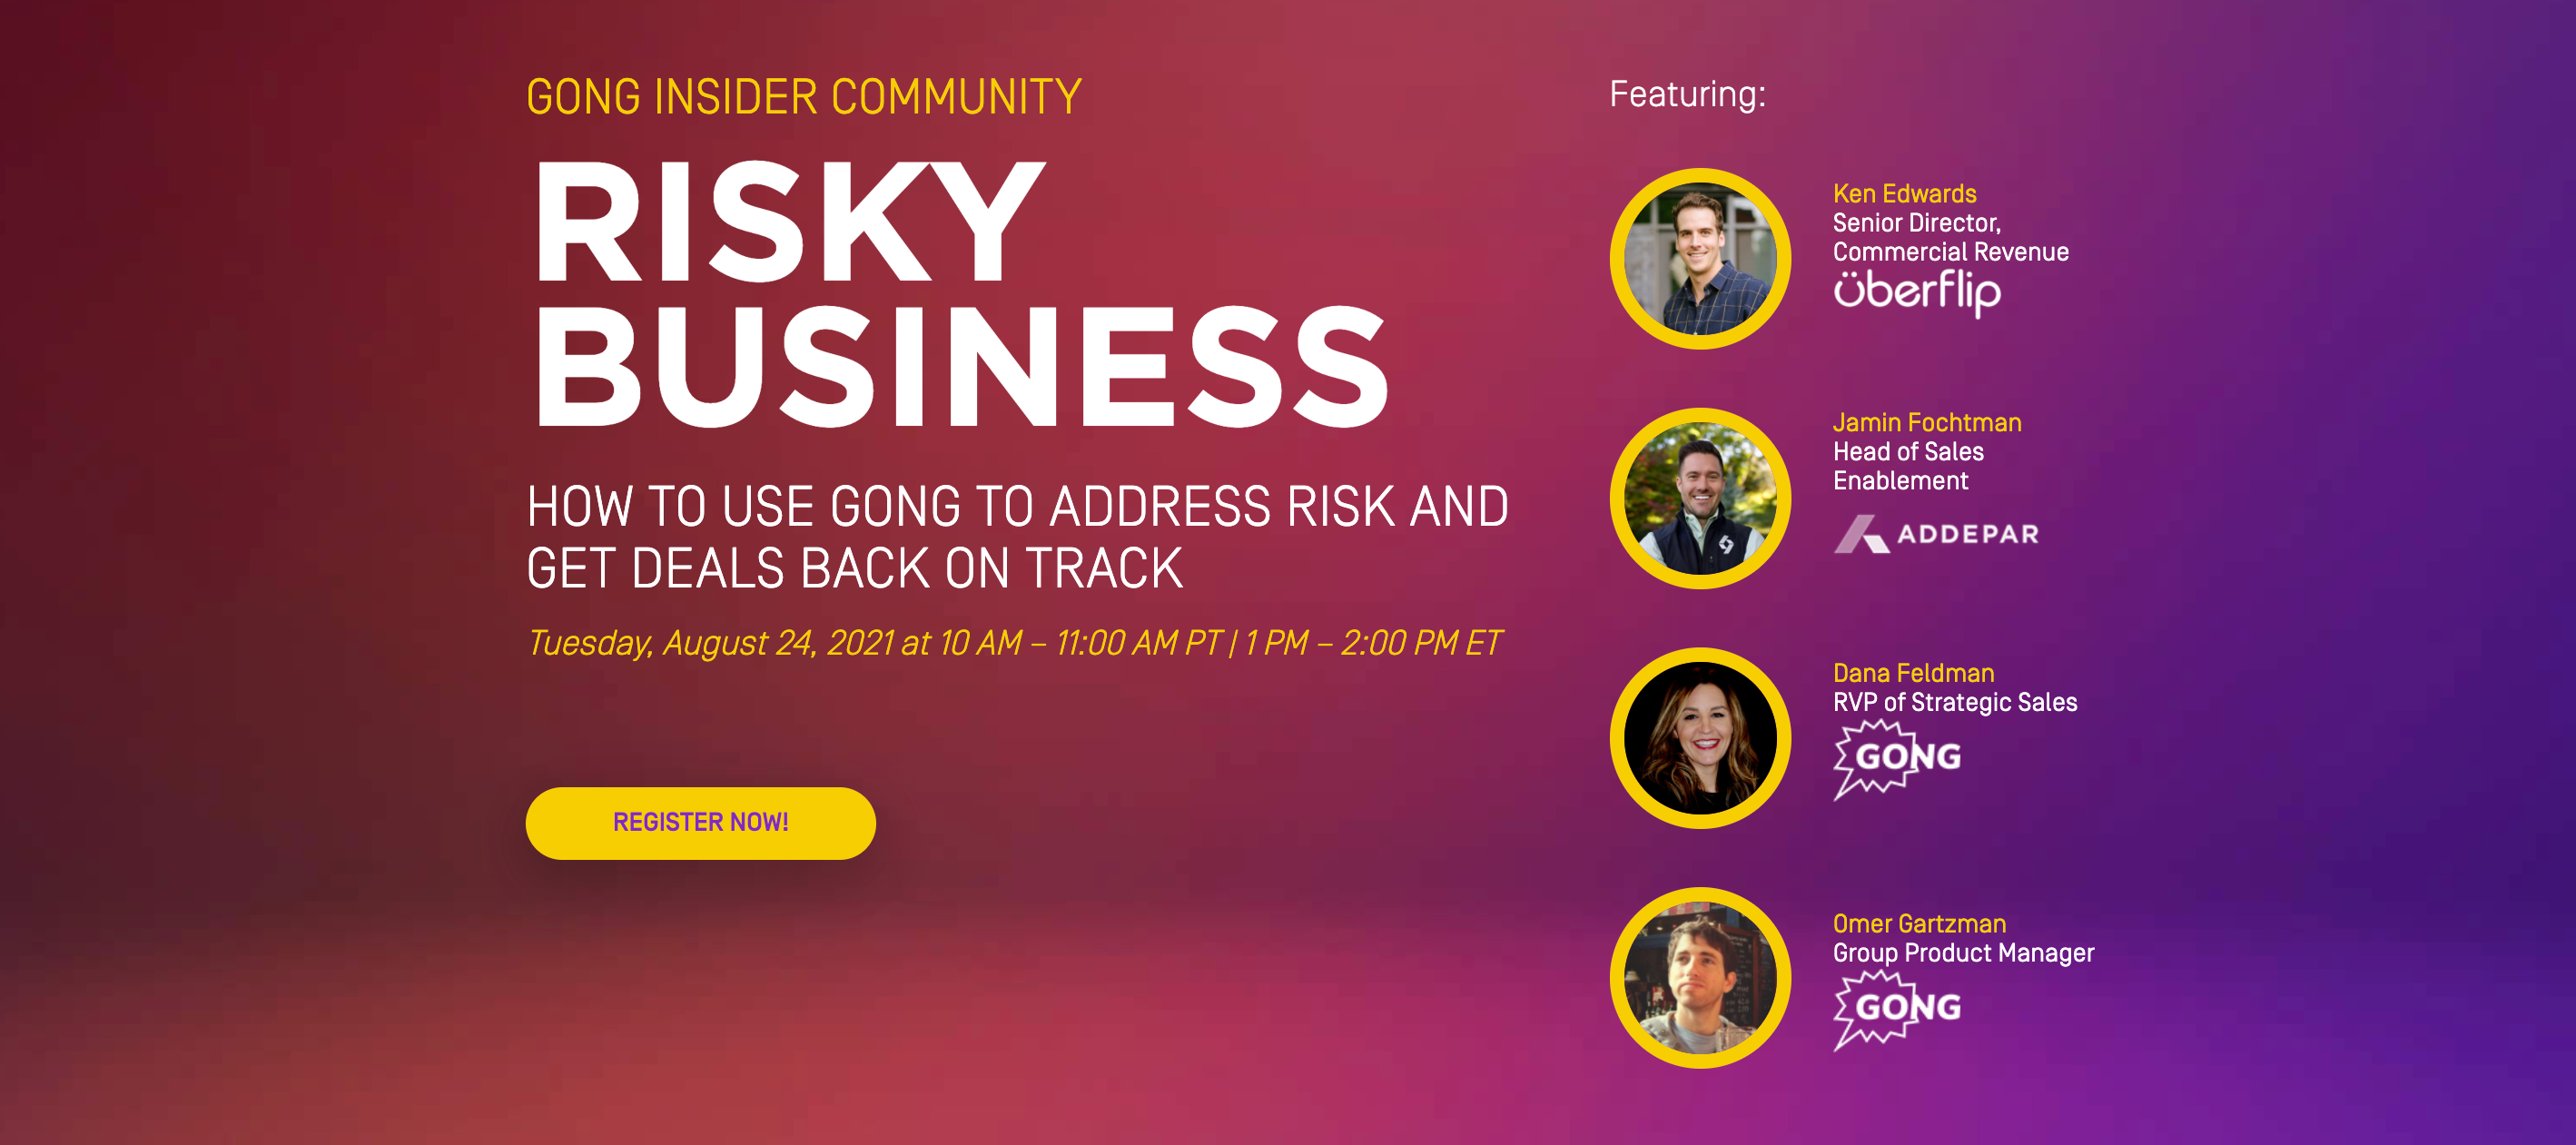 Tips from ‘Risky Business: How to use Gong to address risk and get deals back on track’